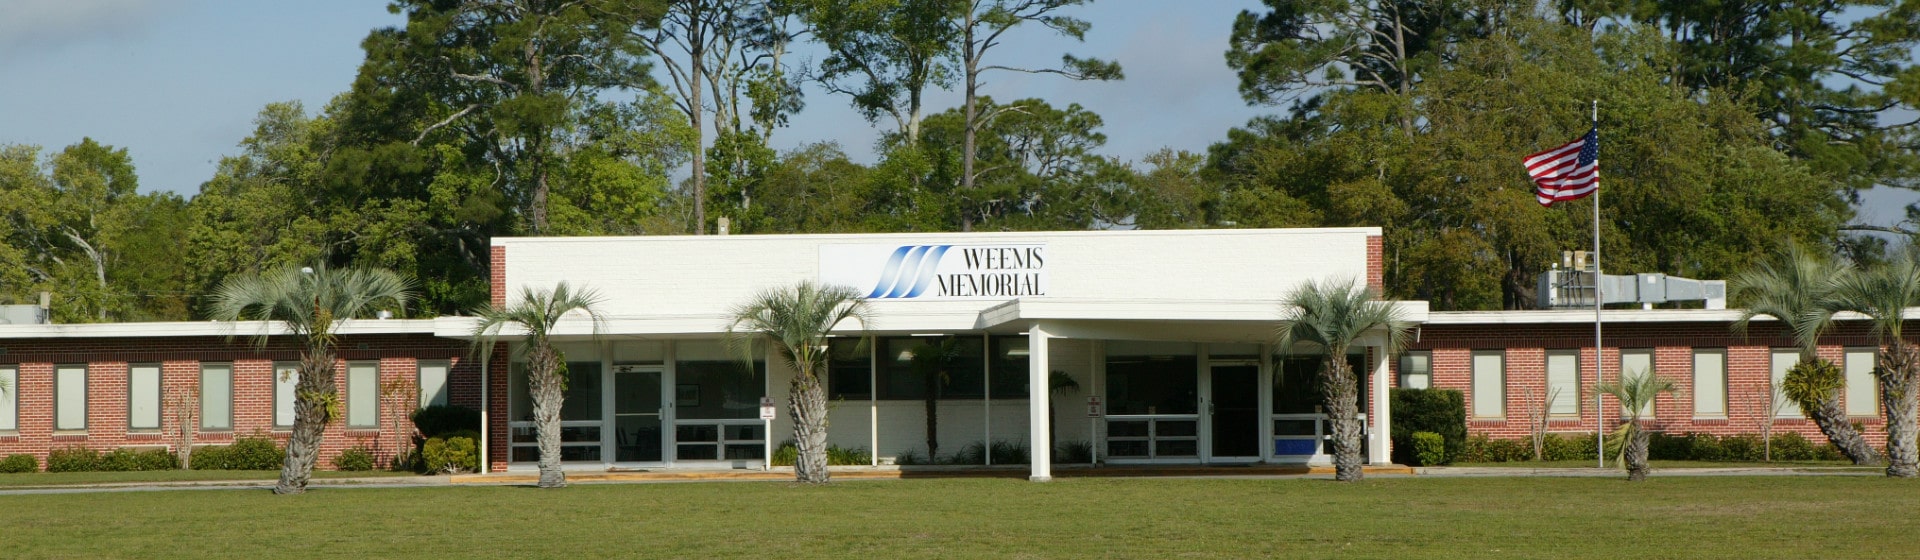 Outside view of Weems Hospital